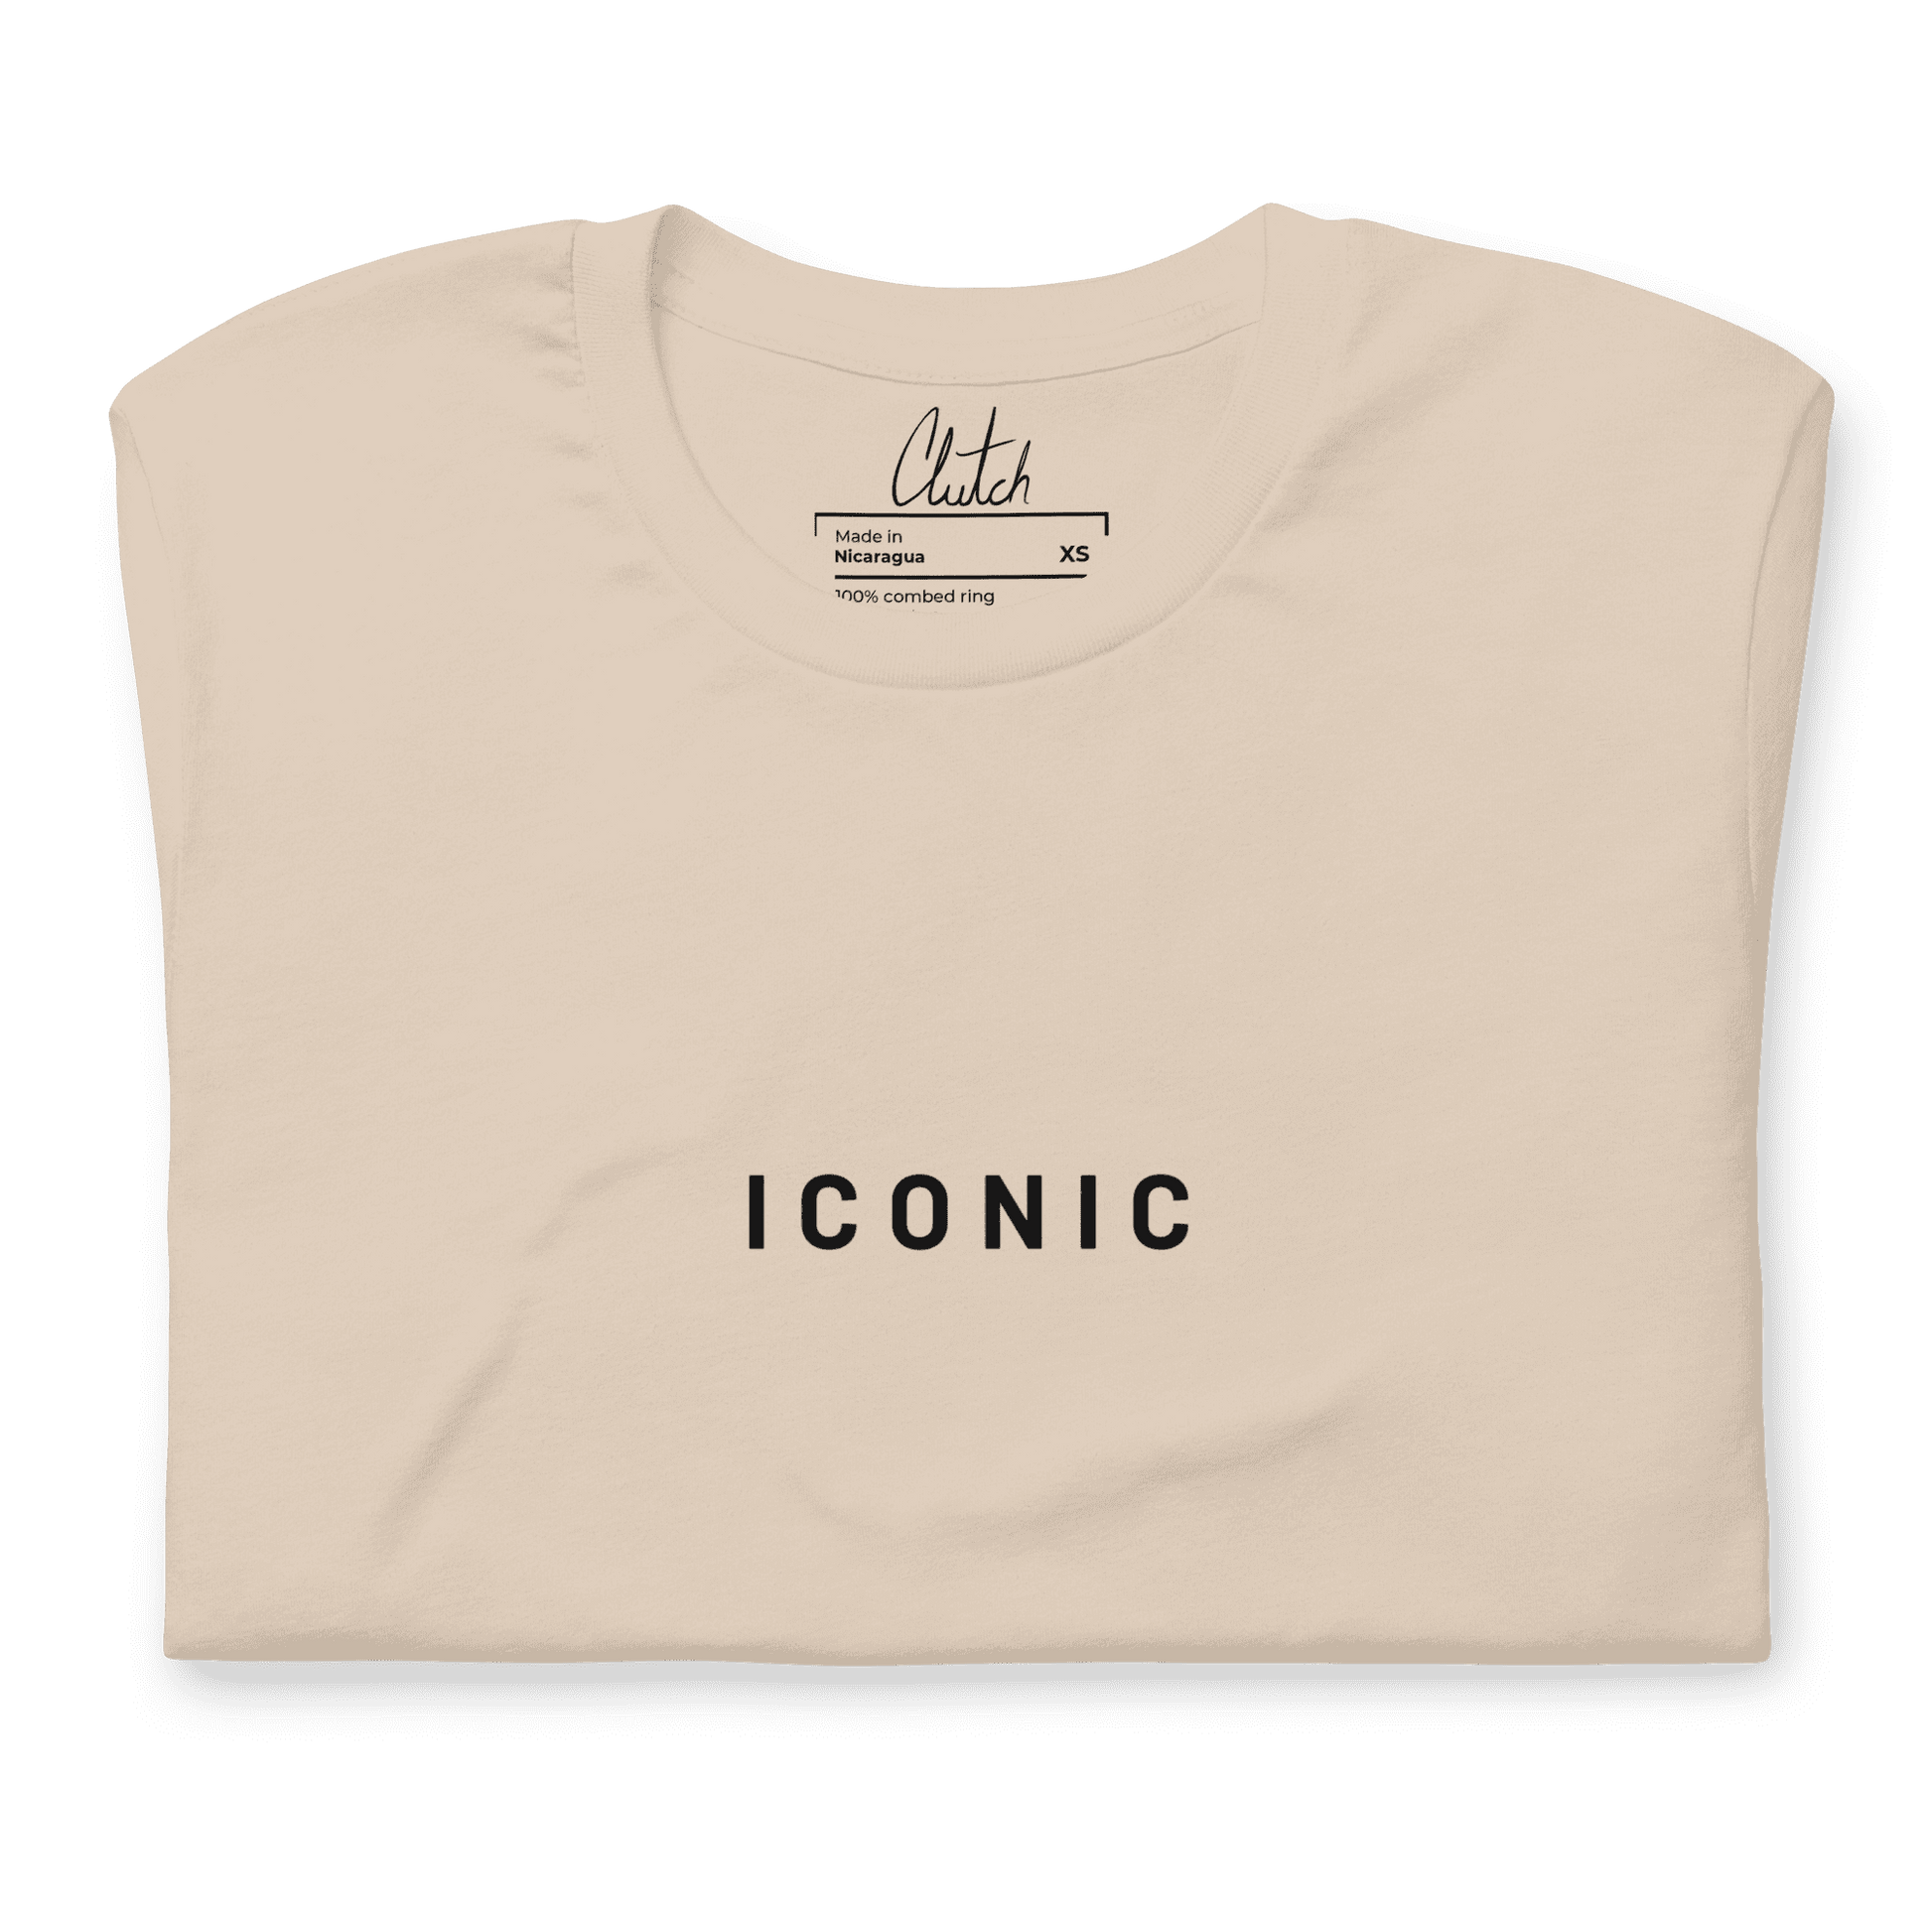 ICONIC | Light Weight Cotton T-shirt - Clutch -